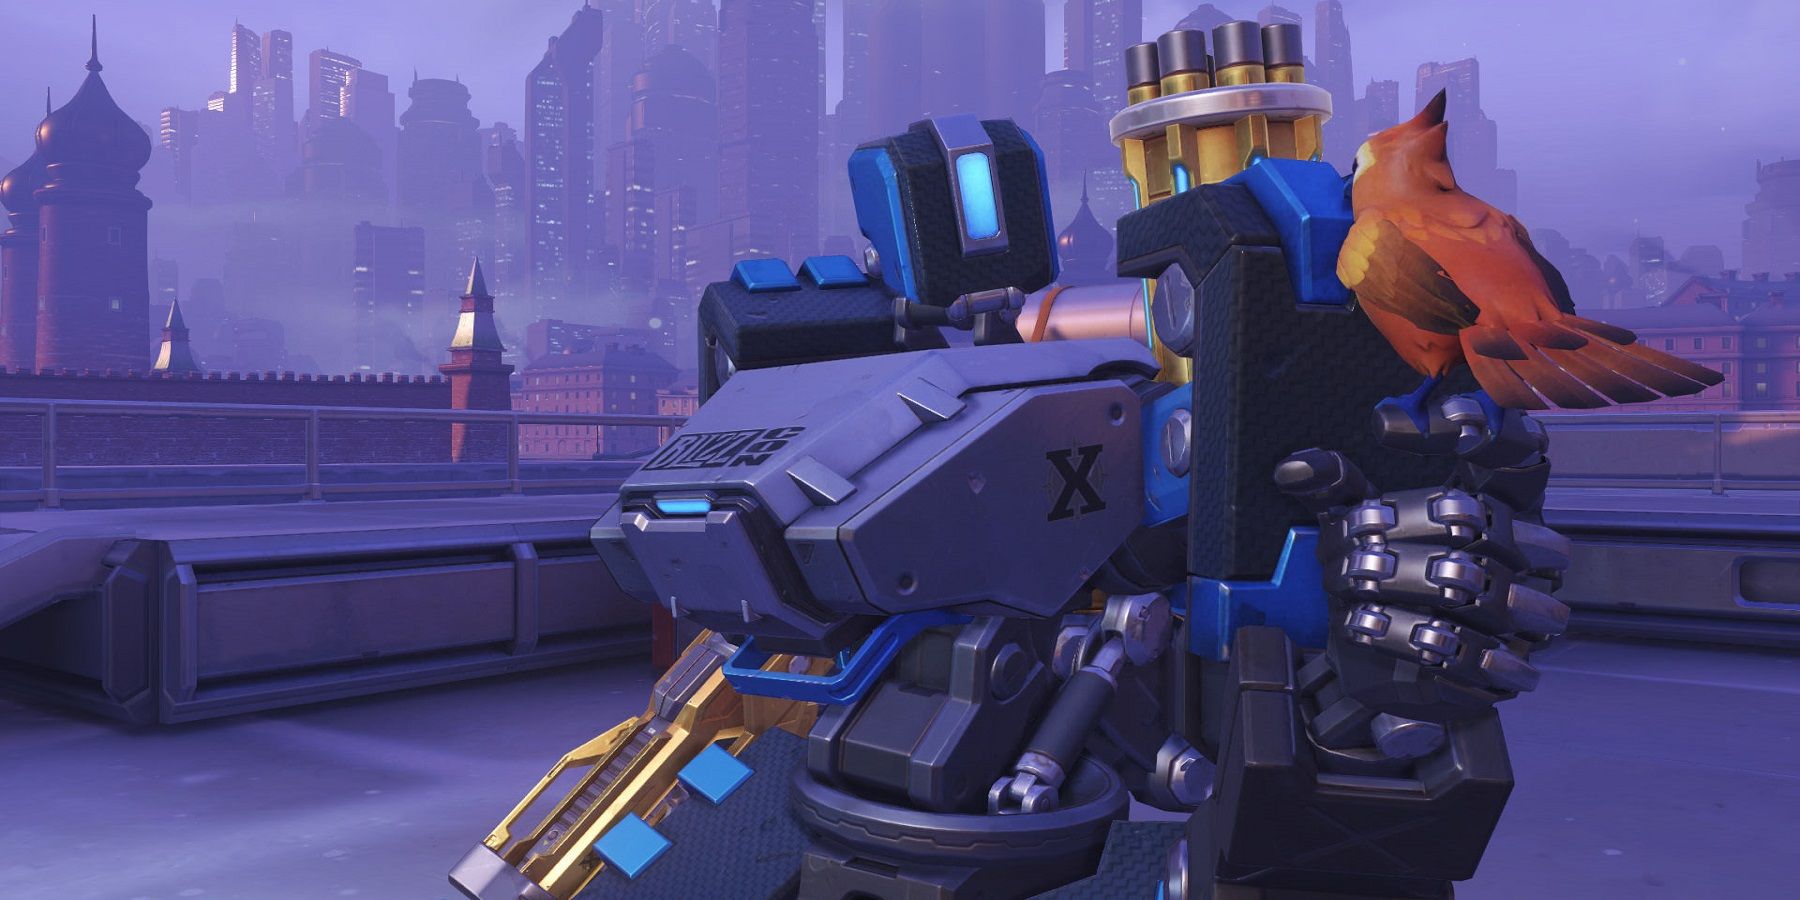 Bastion's BlizzCon skin is one of several rare skins brought up by players debating Overwatch's rarest skins.